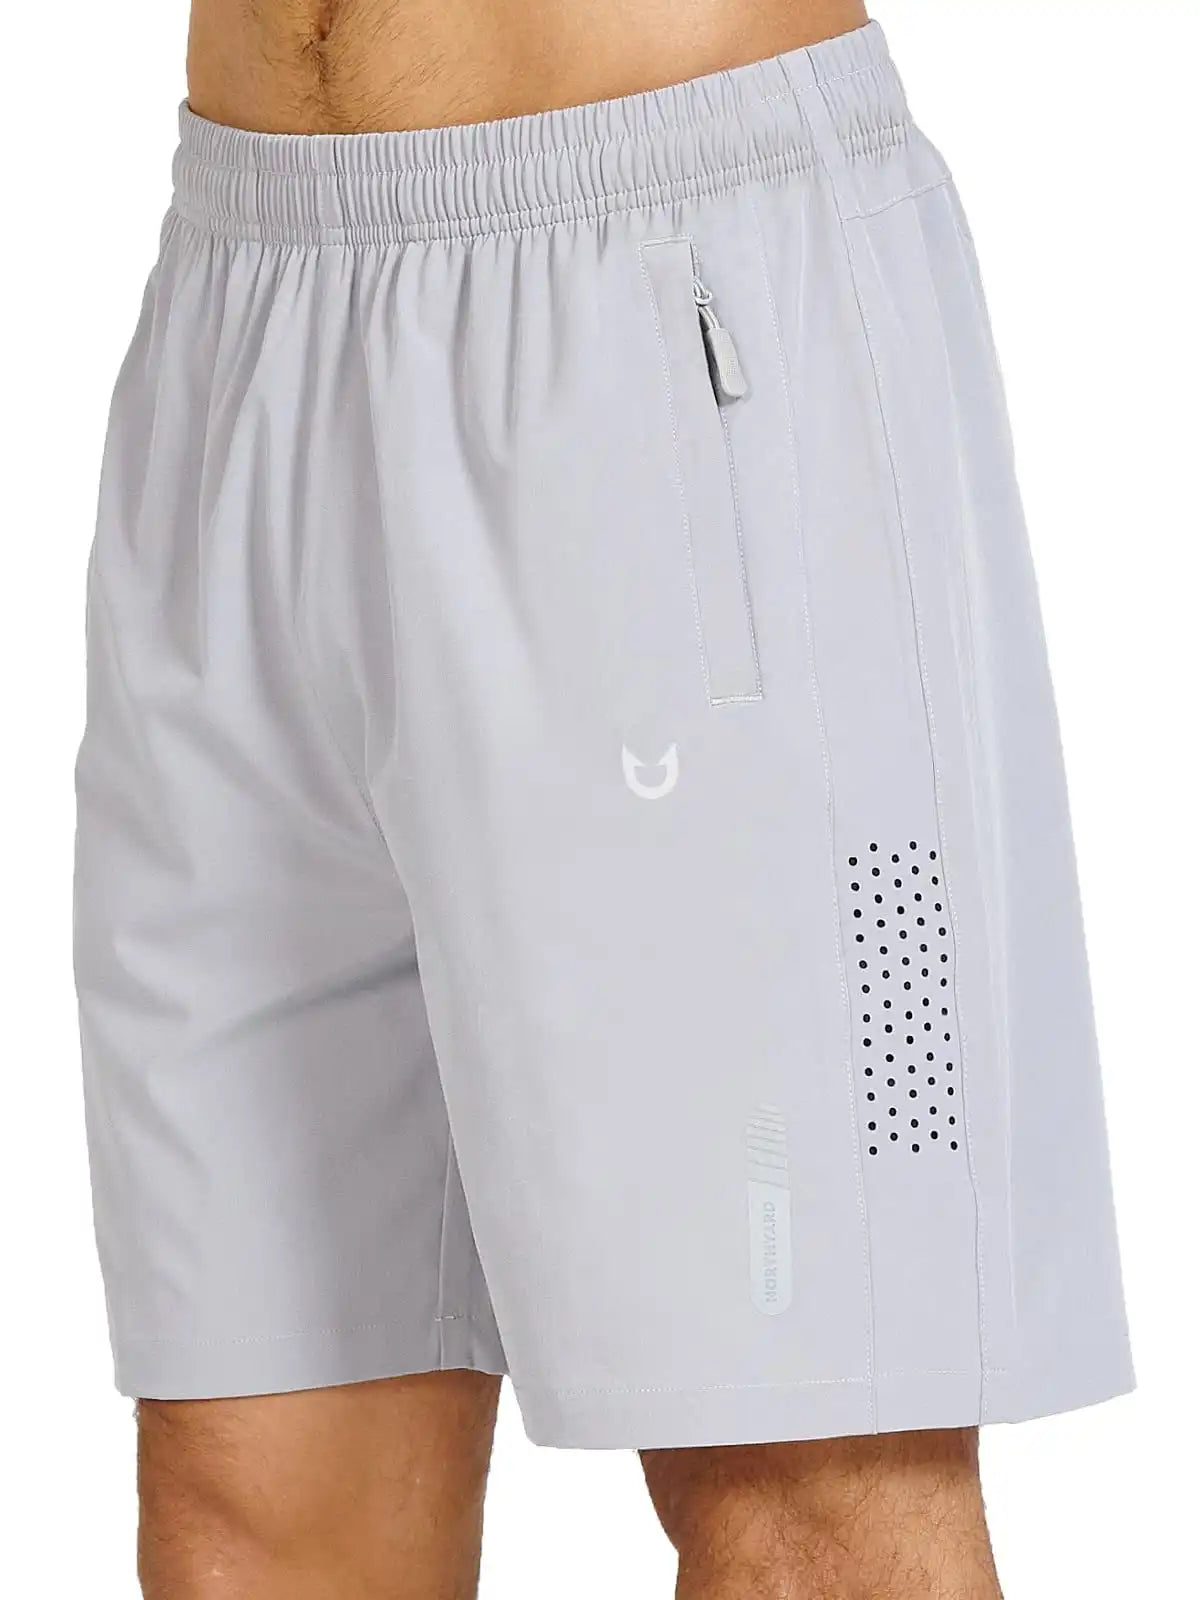 NORTHYARD Men's Athletic Hiking Shorts Quick Dry Workout Shorts 7 ...